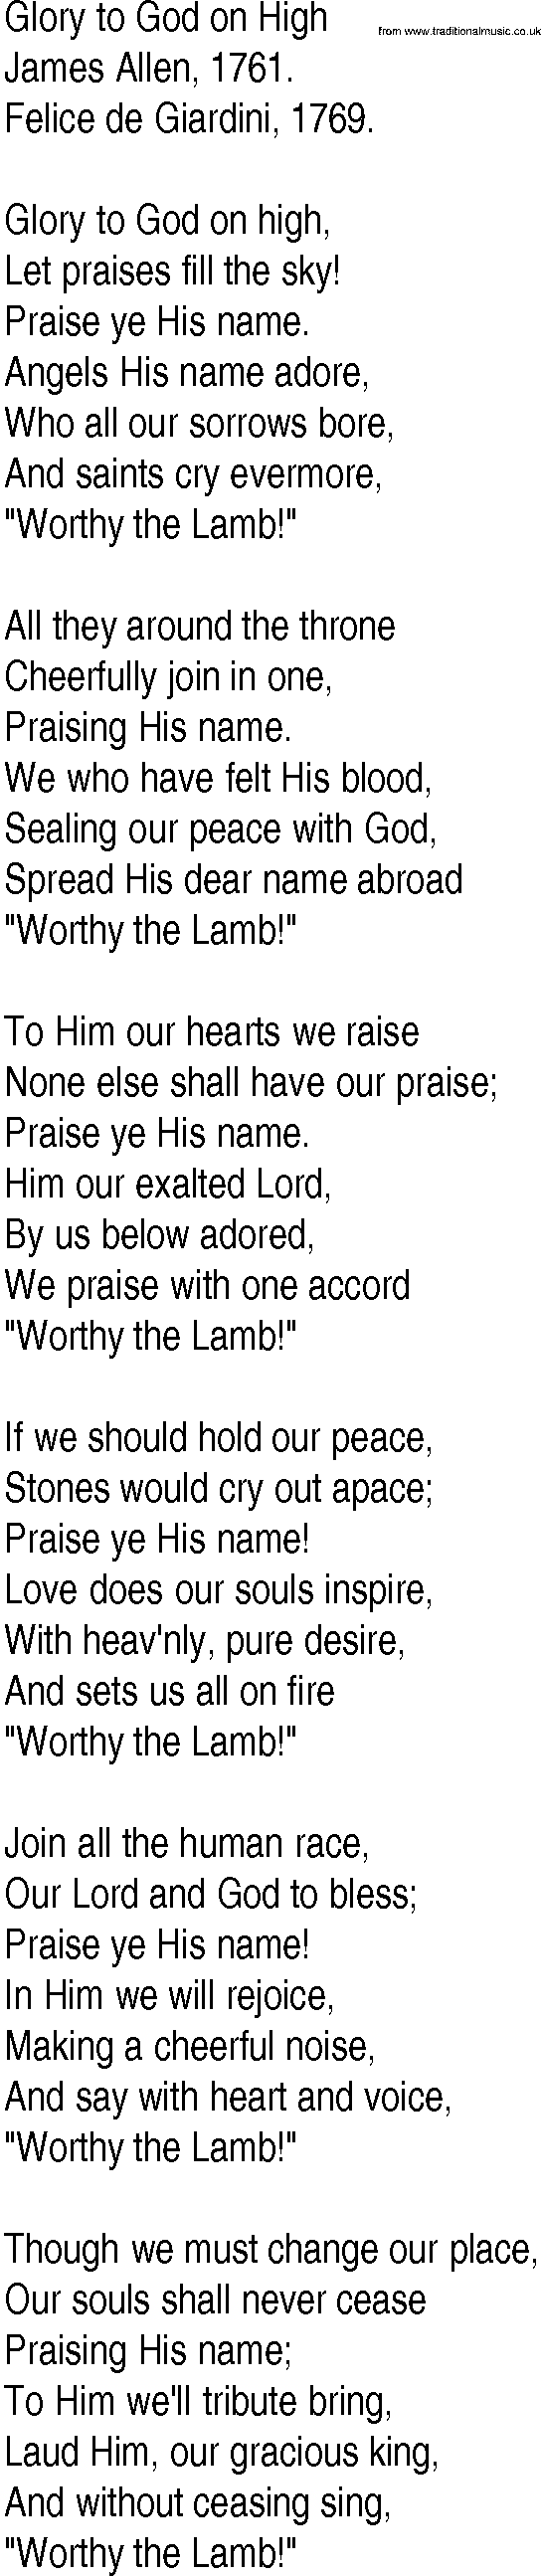 Hymn and Gospel Song: Glory to God on High by James Allen lyrics